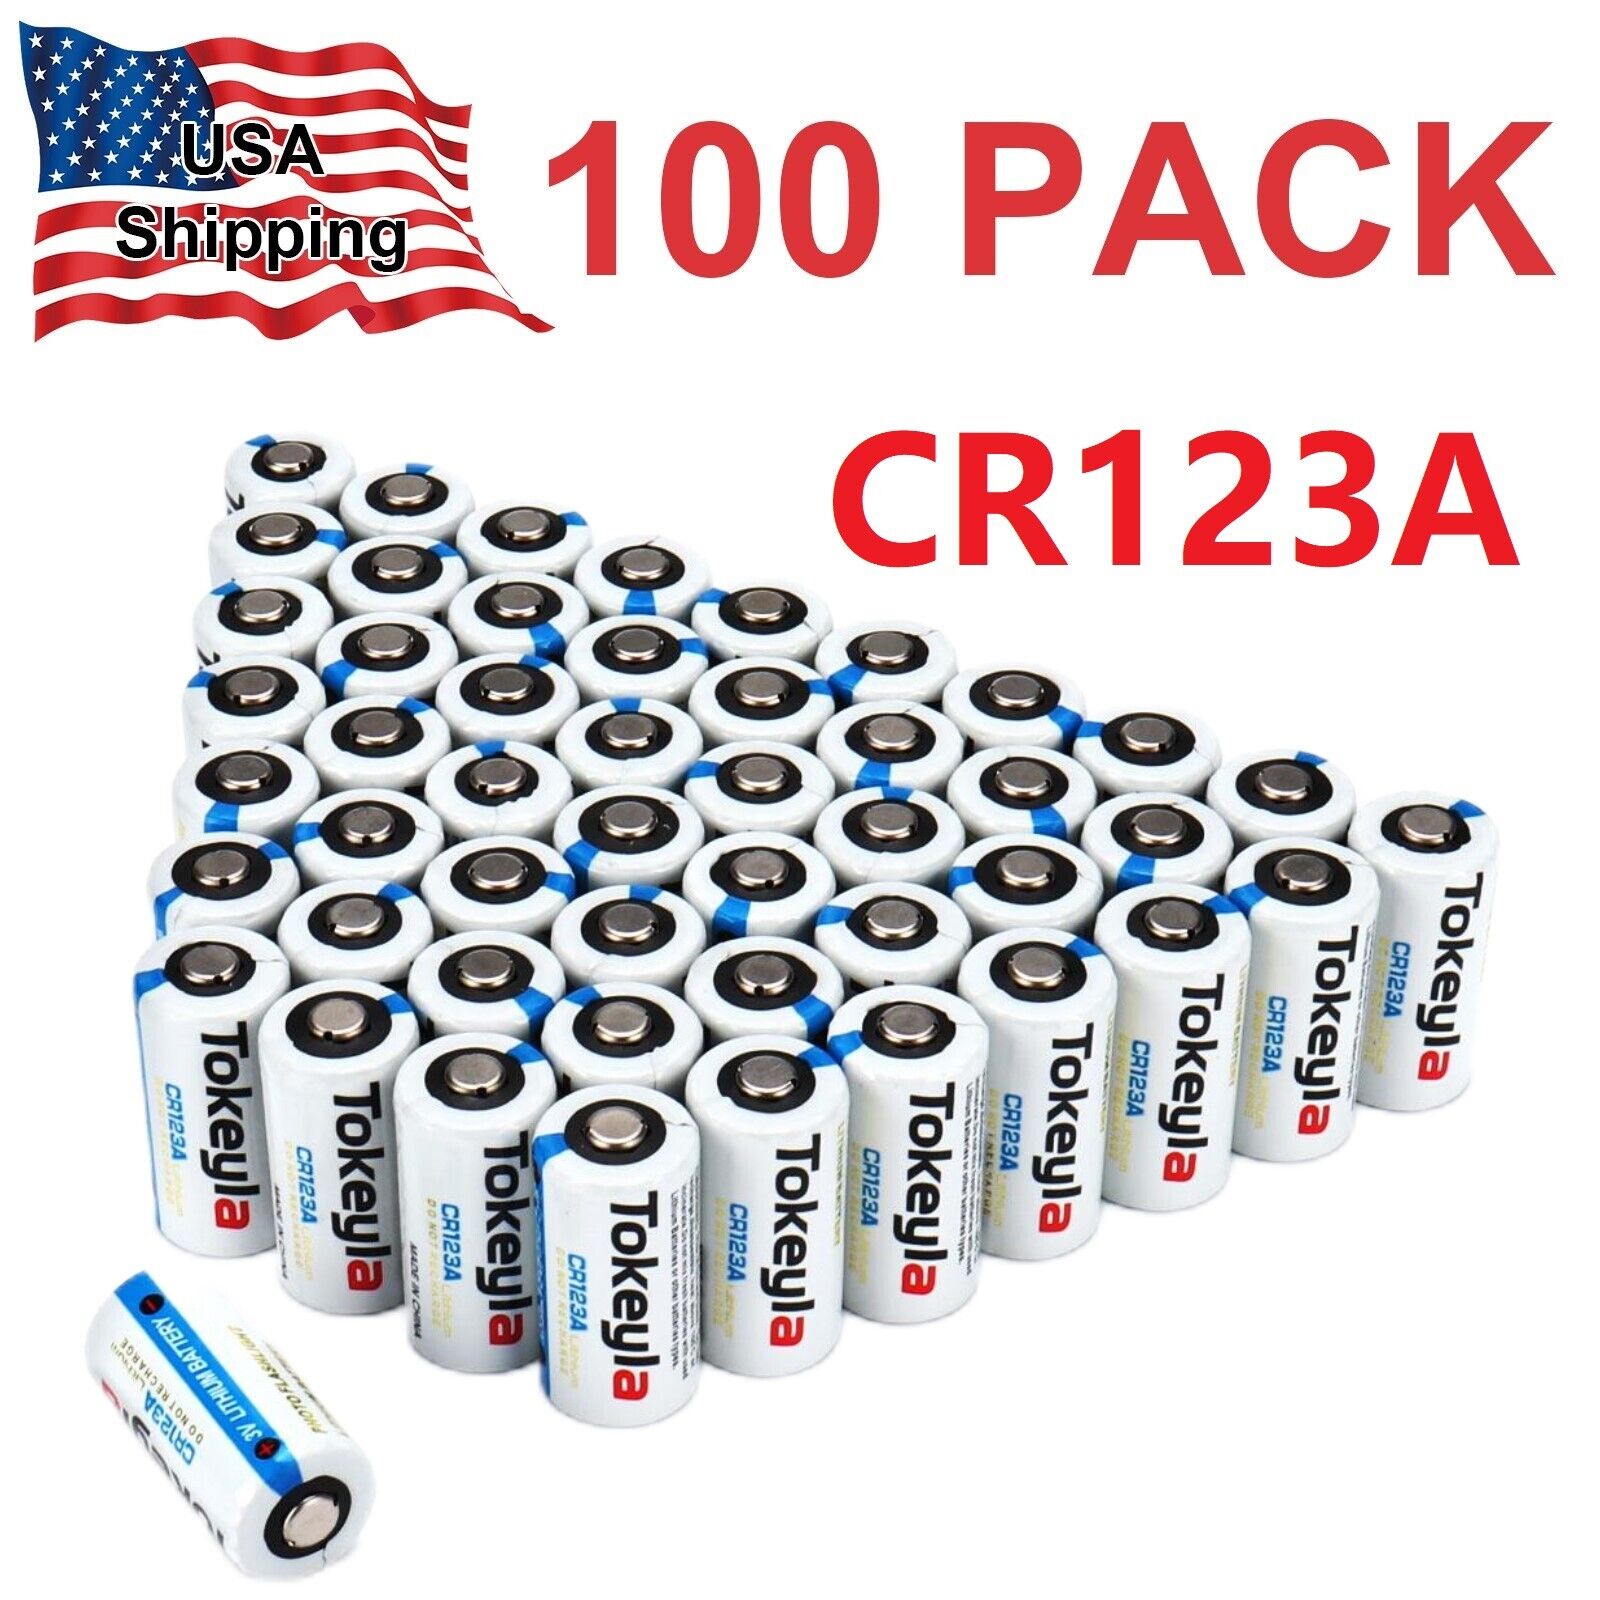 Lot 2-100 Pack 1500mAh Lithium Battery CR123A 123A 3V Non Rechargeable Batteries